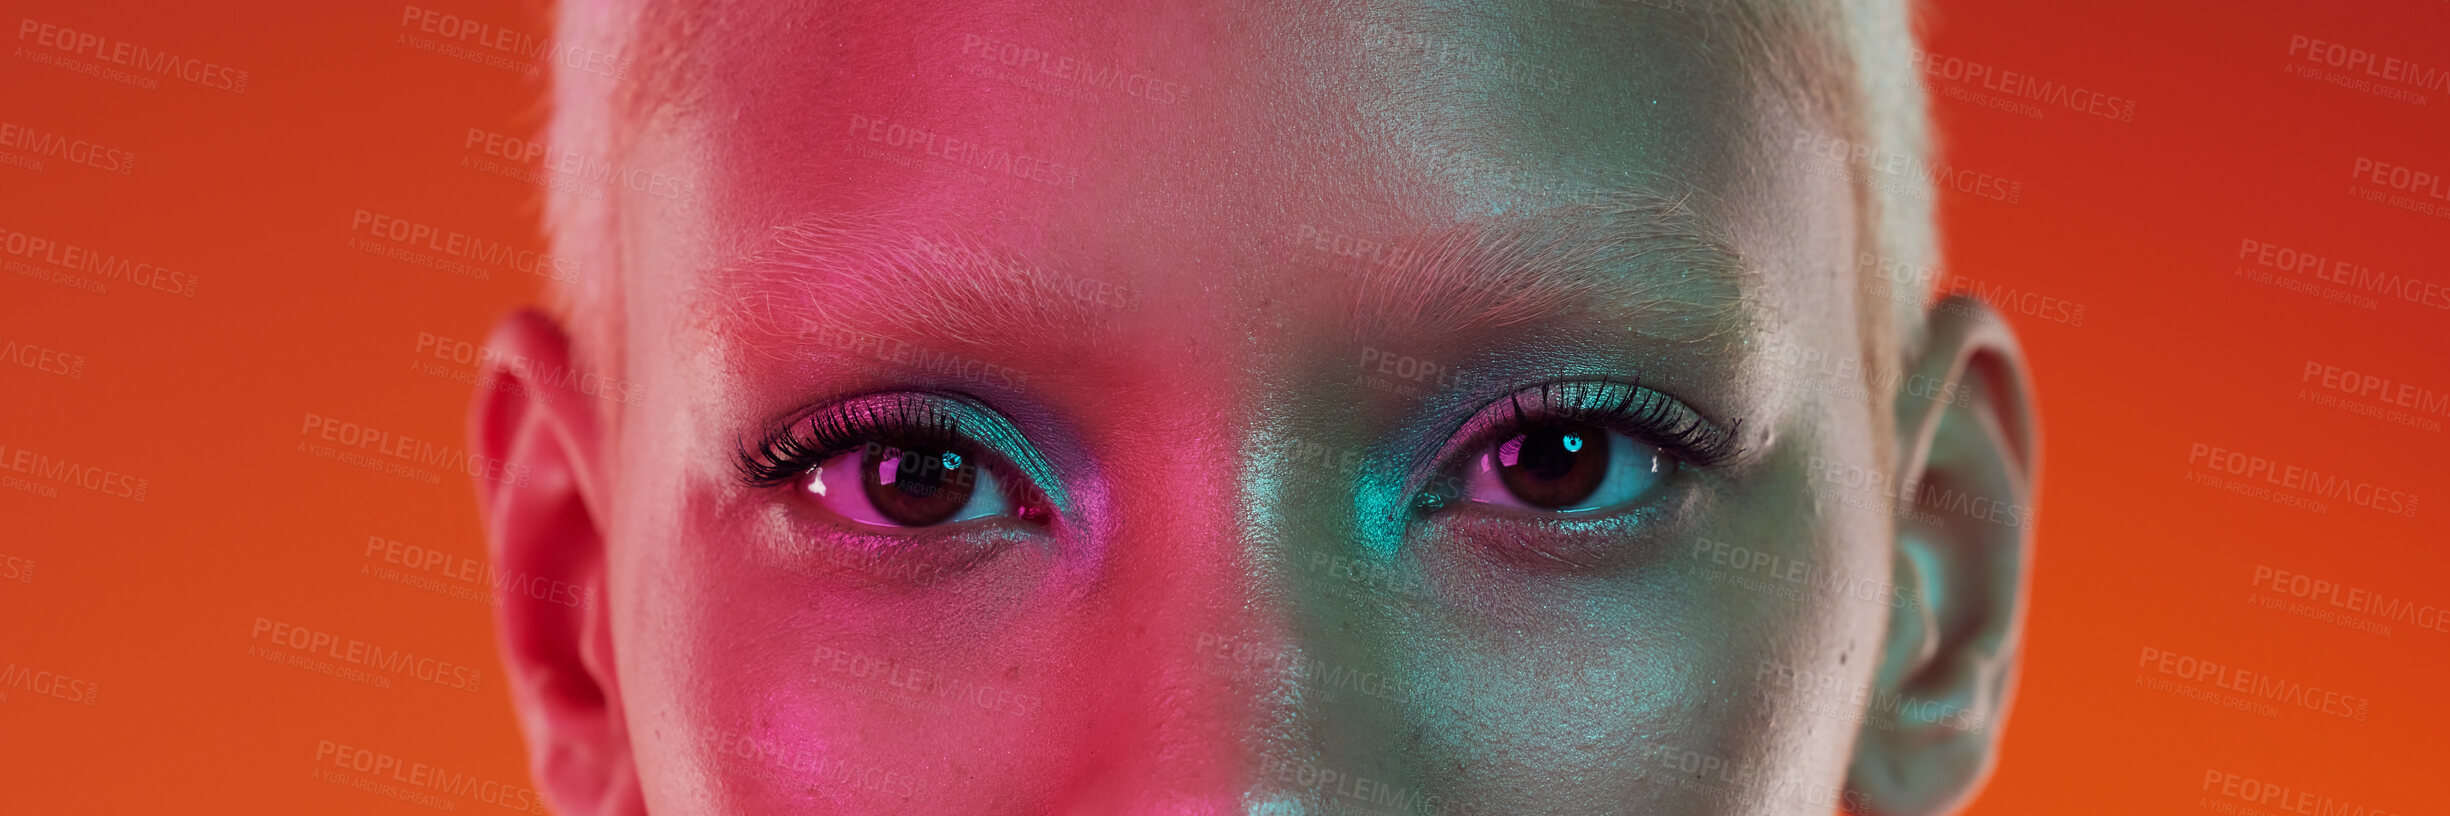 Buy stock photo Makeup, cyberpunk and portrait of the eyes of a woman isolated on an orange background in a studio. Edgy, creative and banner of the face of a trendy model with cosmetics, glamour and eyeshadow